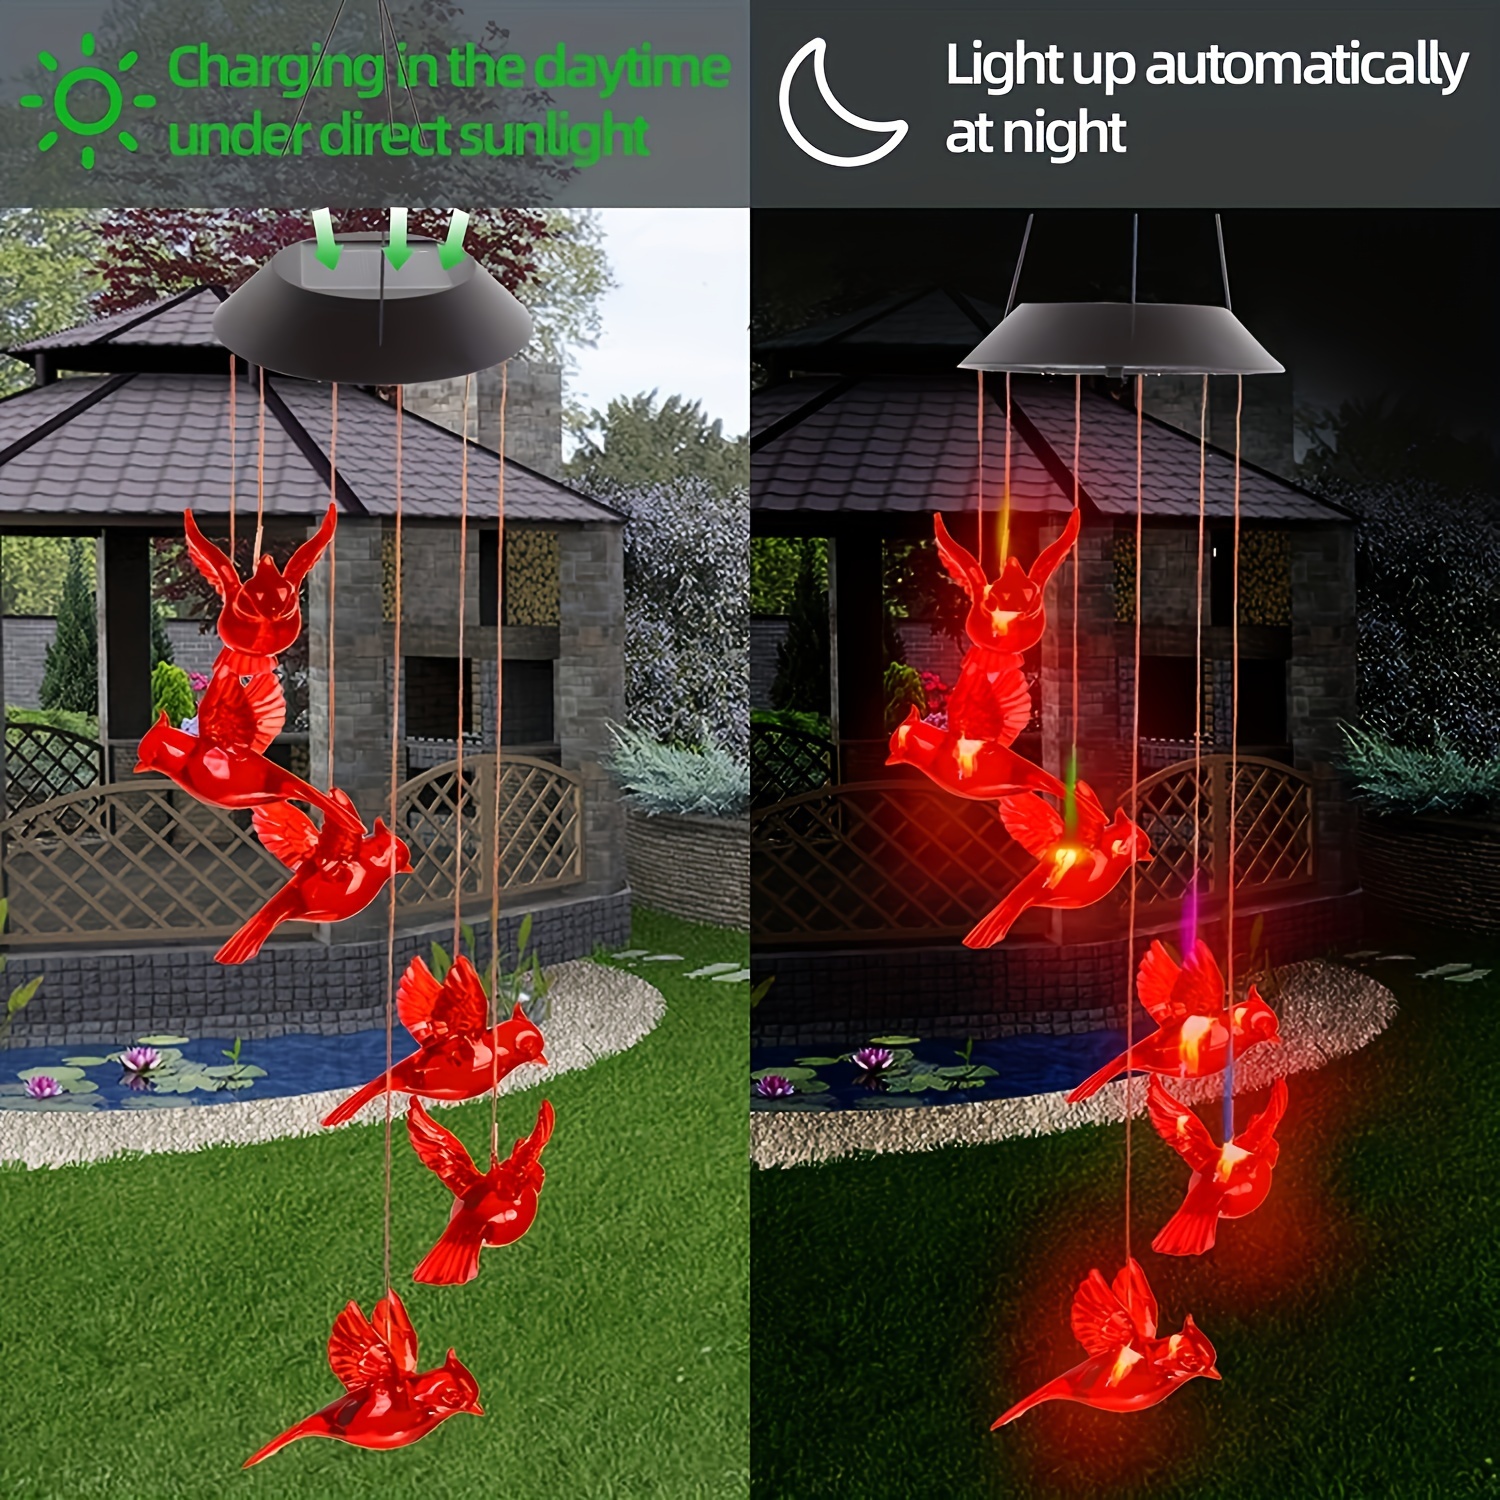 

1pc Solar-powered Red Flame Bird Wind Chime Light, Outdoor Garden Patio Decor Hanging Lamp, Durable Plastic Material